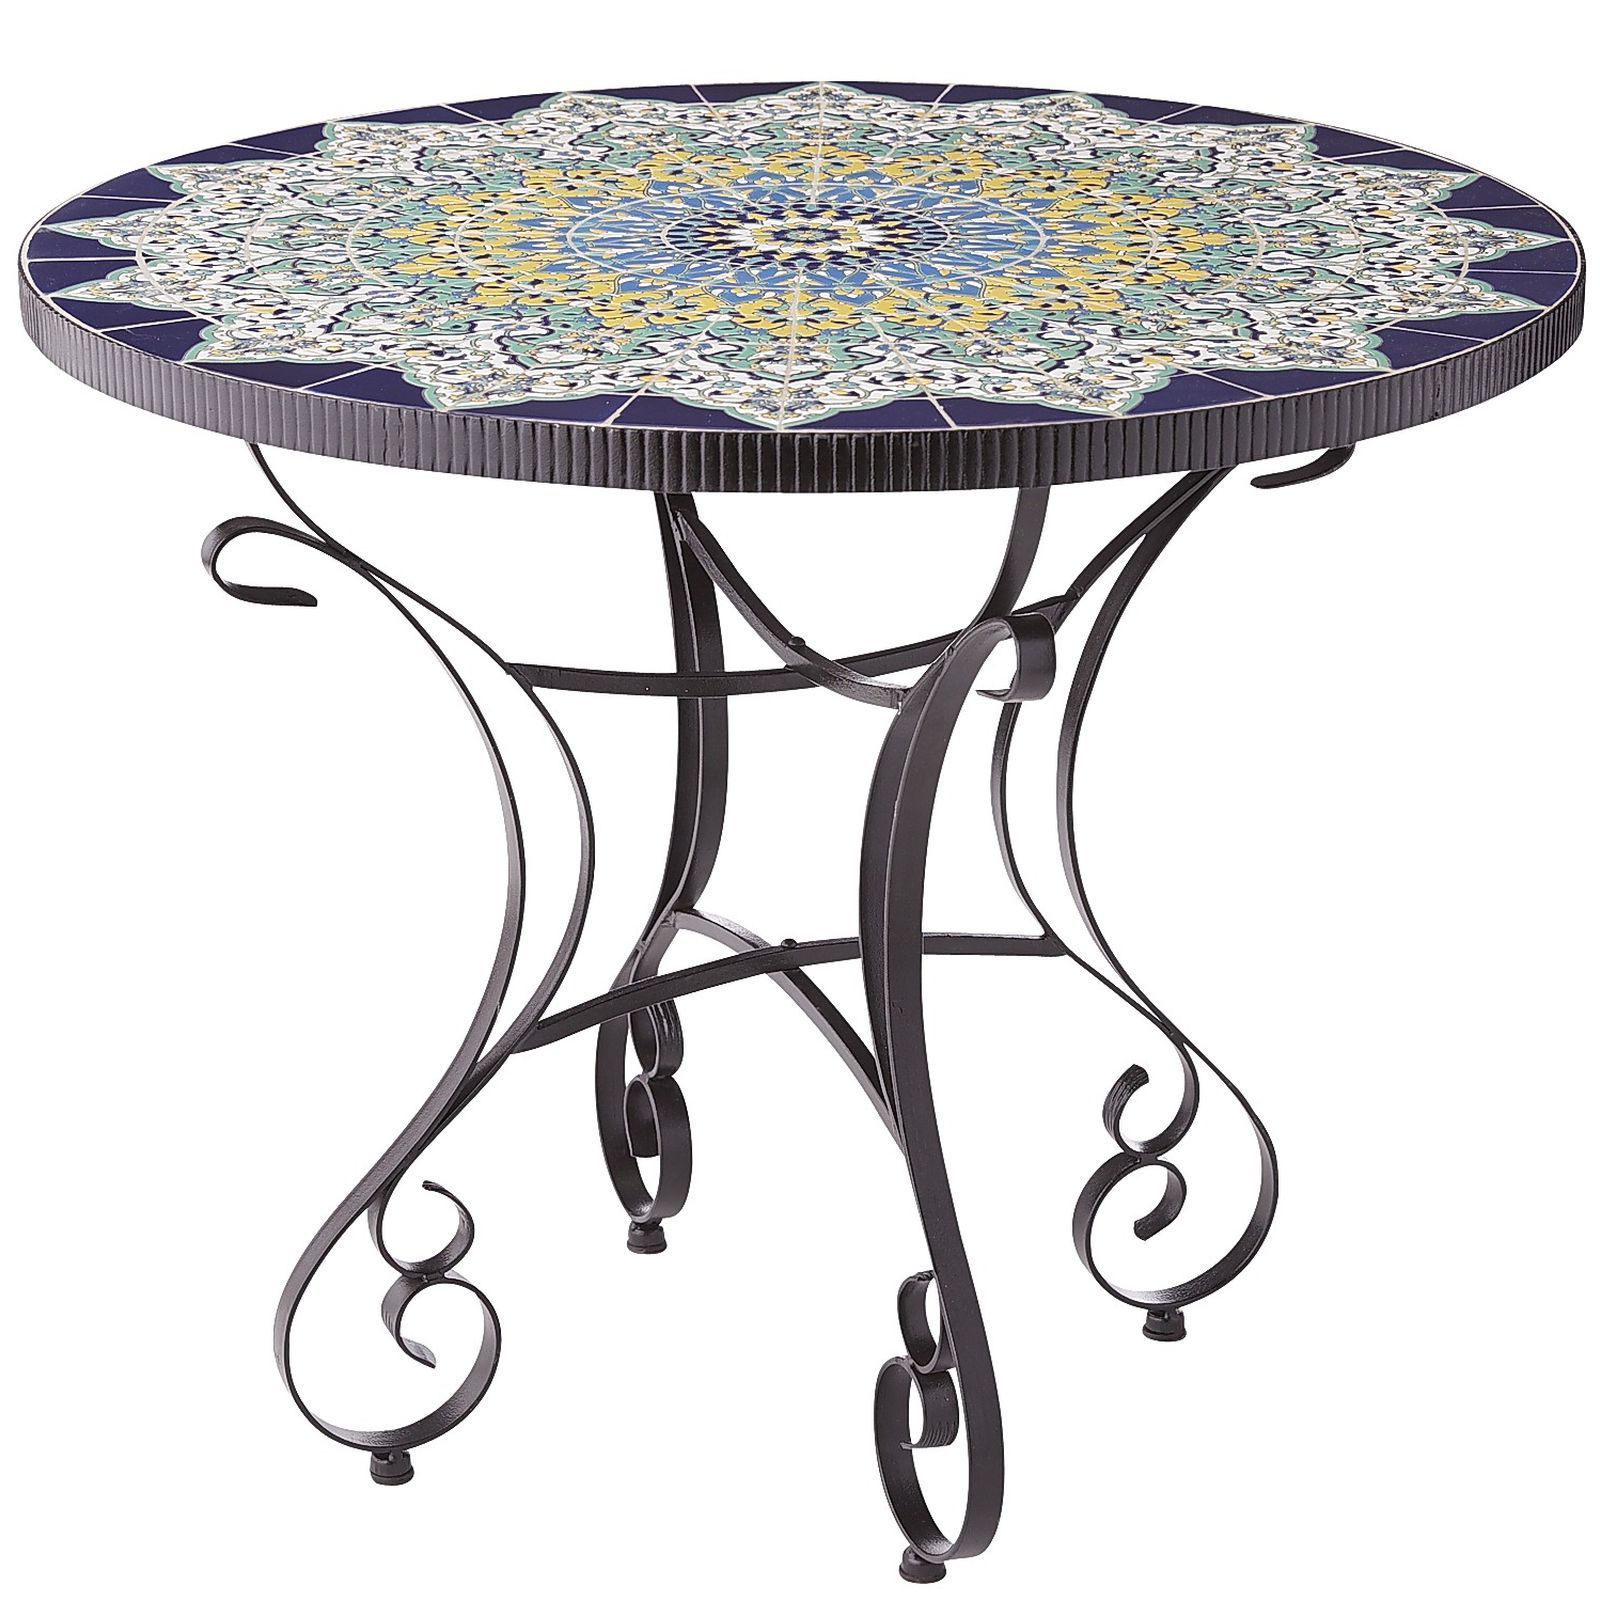 Outdoor Accent Table, Mosaic Patio For Fashionable Blue Mosaic Black Iron Outdoor Accent Tables (View 10 of 15)